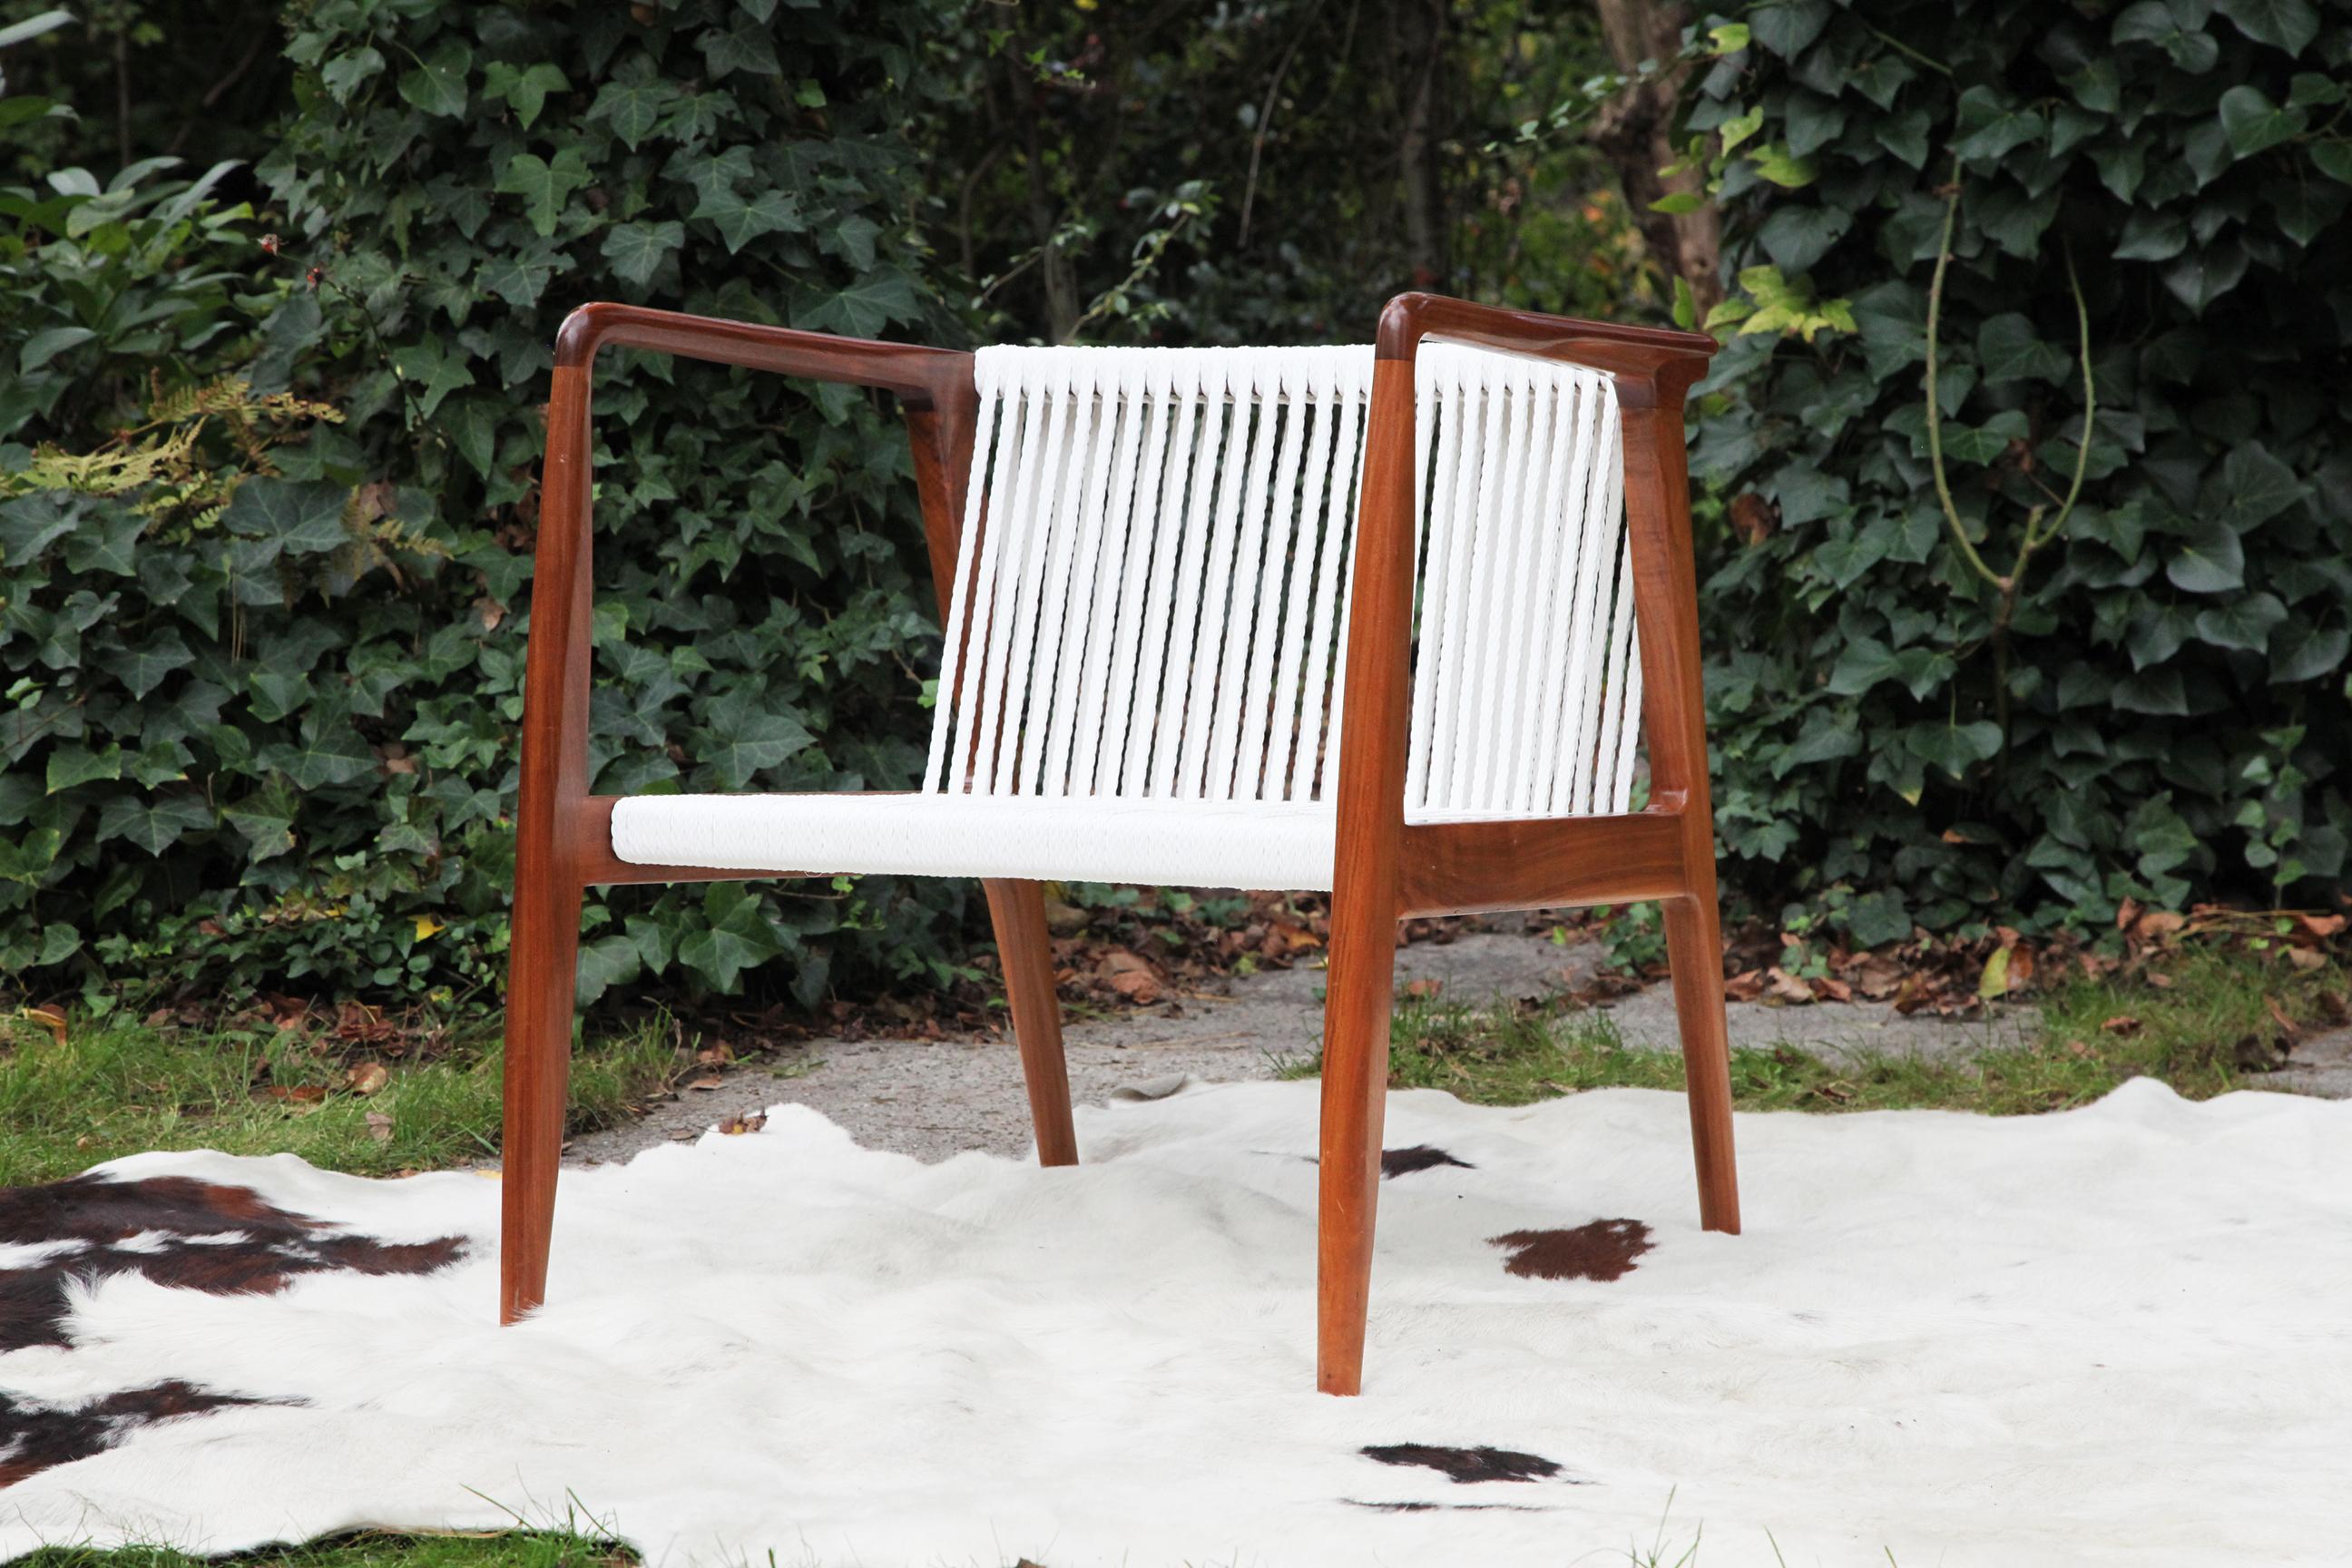 Available here is truly a rare, fantastic and iconic Danish style Walnut Mid Century Lounge Chair. It is an original vintage frame, that has been completely cleaned and beautifully restored. The Frame has had customized rope seating done for it.